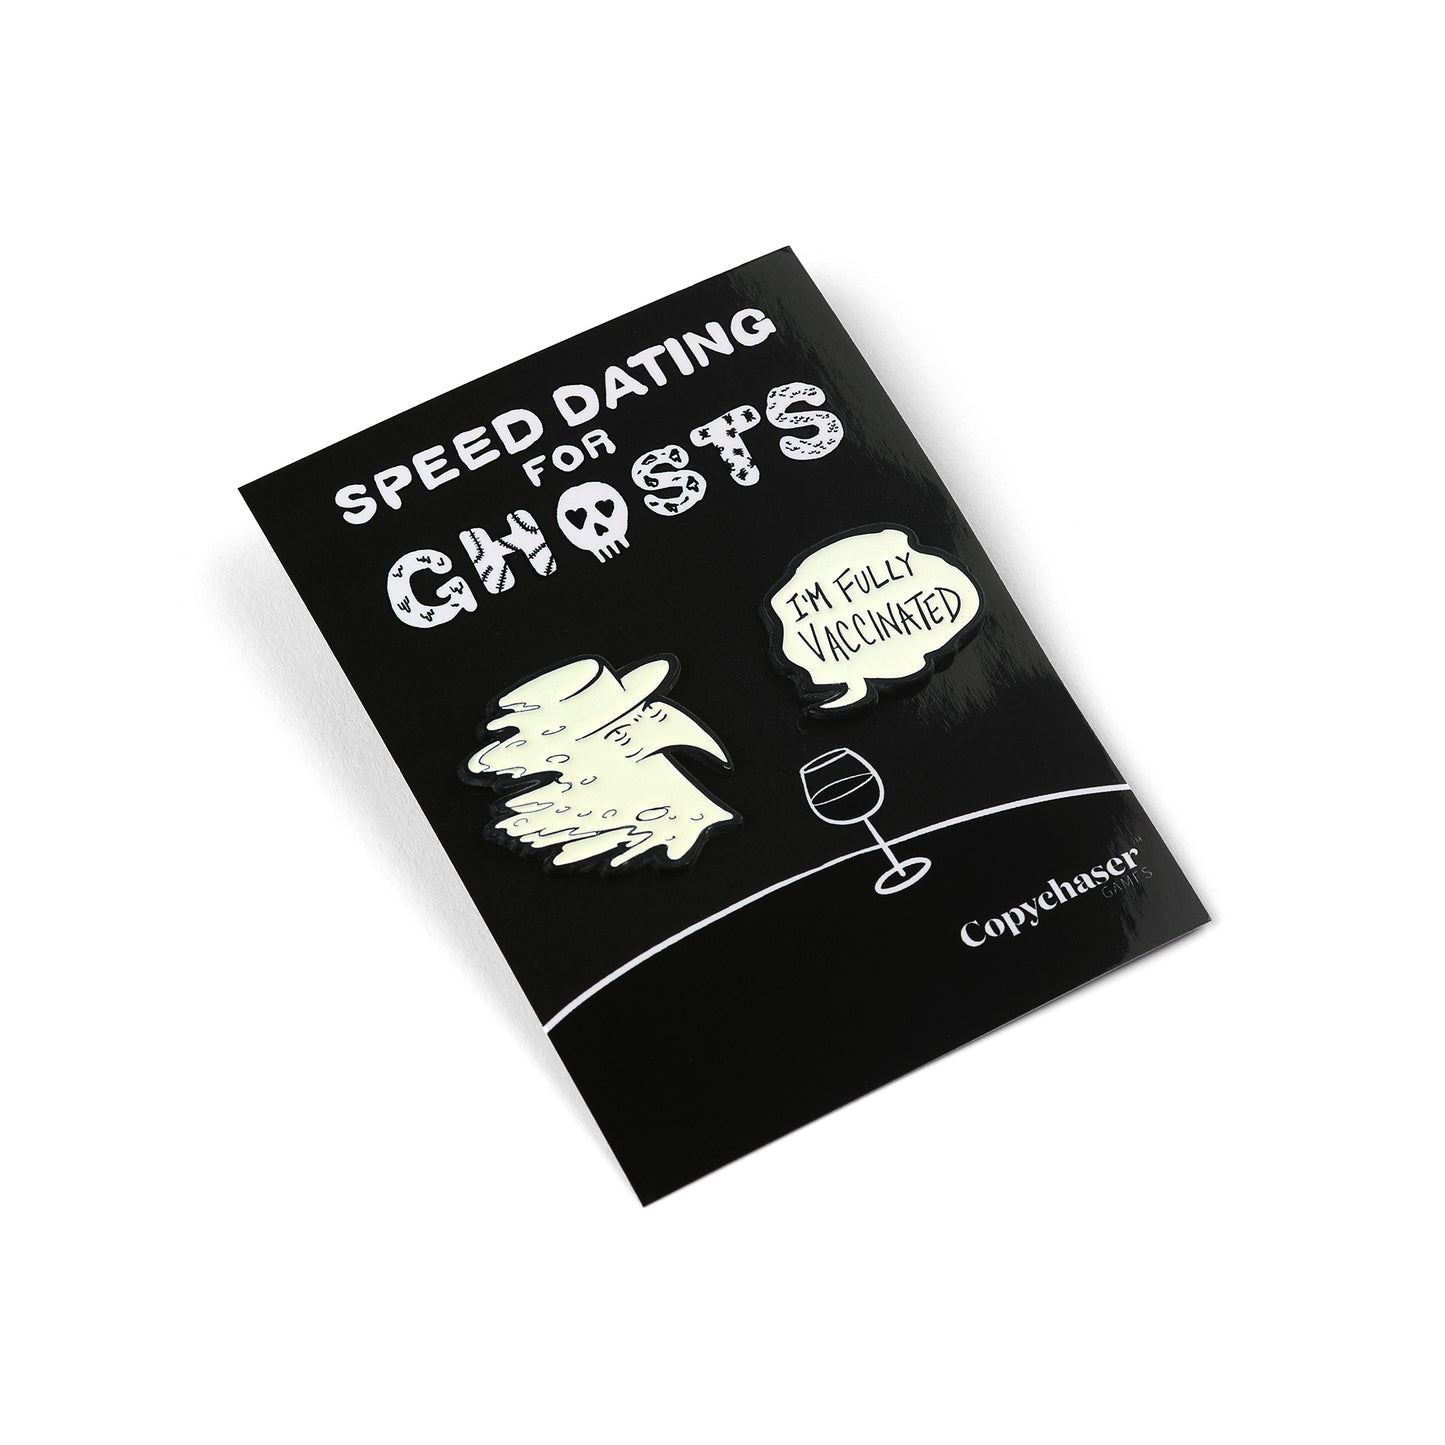 Spooky Peter Pin set on their black backing card with white background.